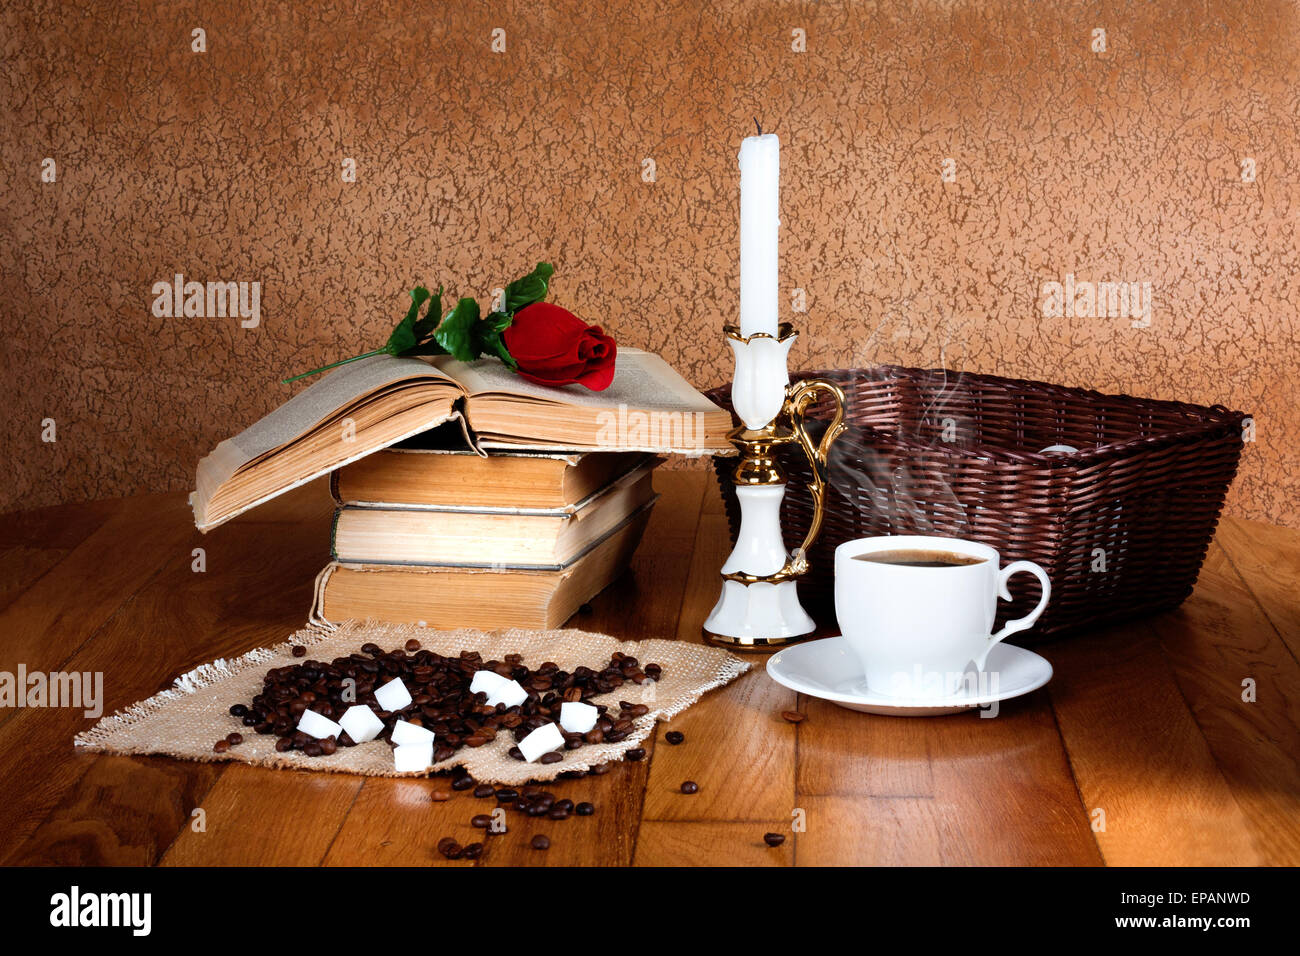 Hot cup of fresh coffee on the wooden table and stack of books to read with red rose Stock Photo